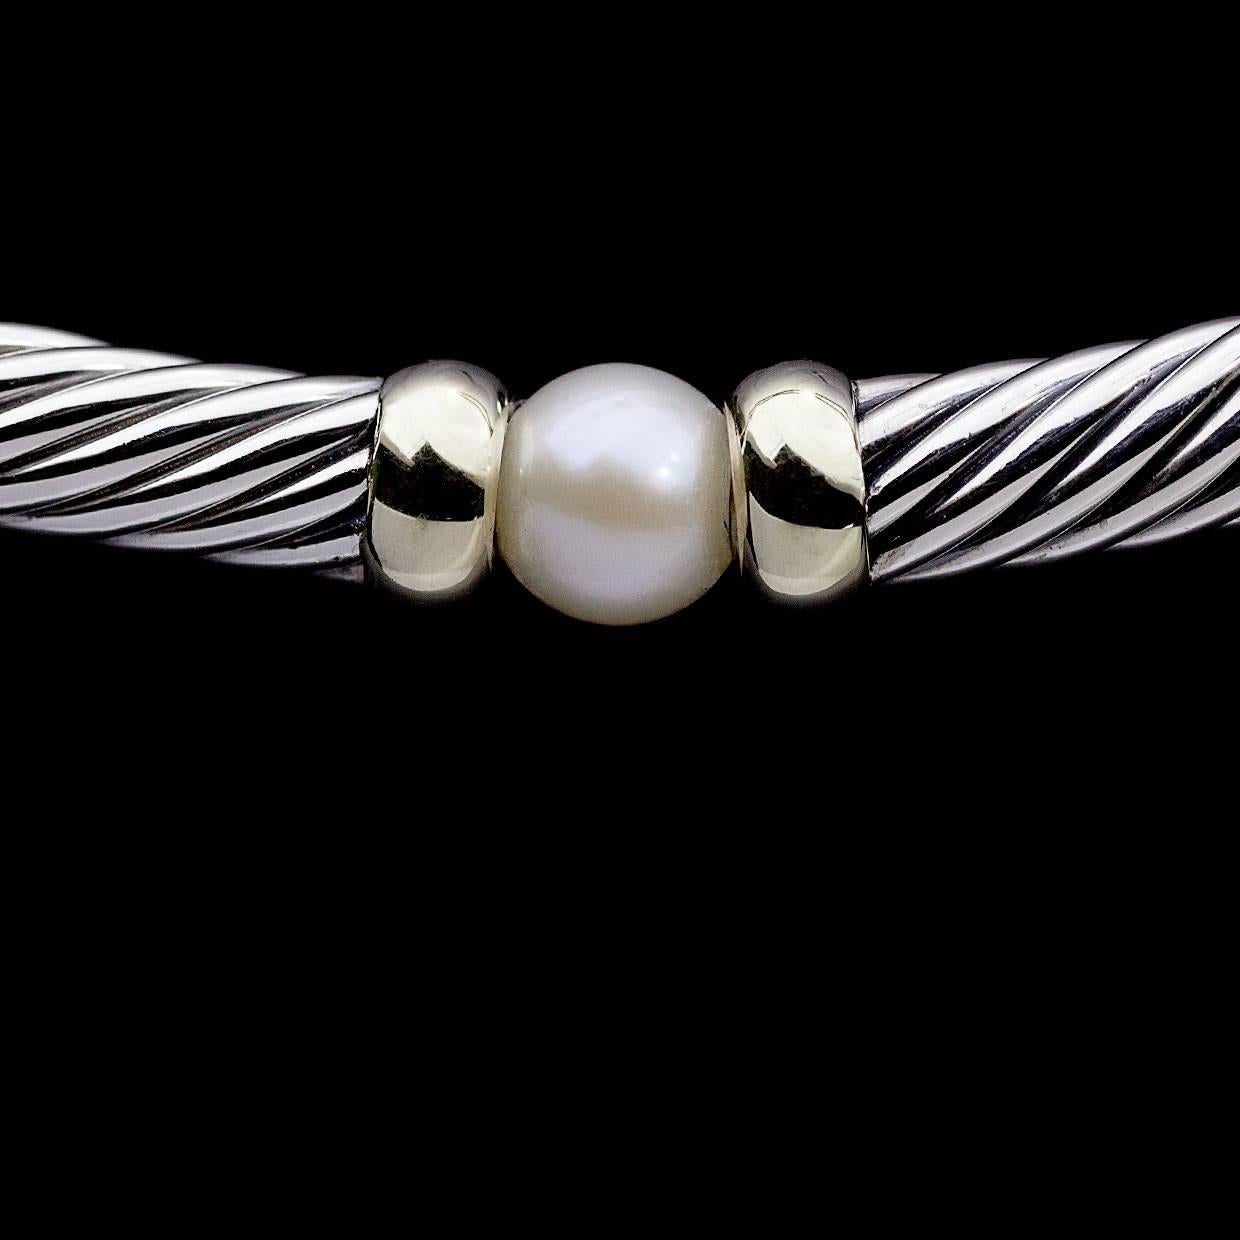 David Yurman's cable style jewelry has become his signature, the unifying element of every collection. This classic necklace is from Yurman's Hampton Collectin. It features 6 beautiful cultured pearls in between 14 karat yellow gold accents &